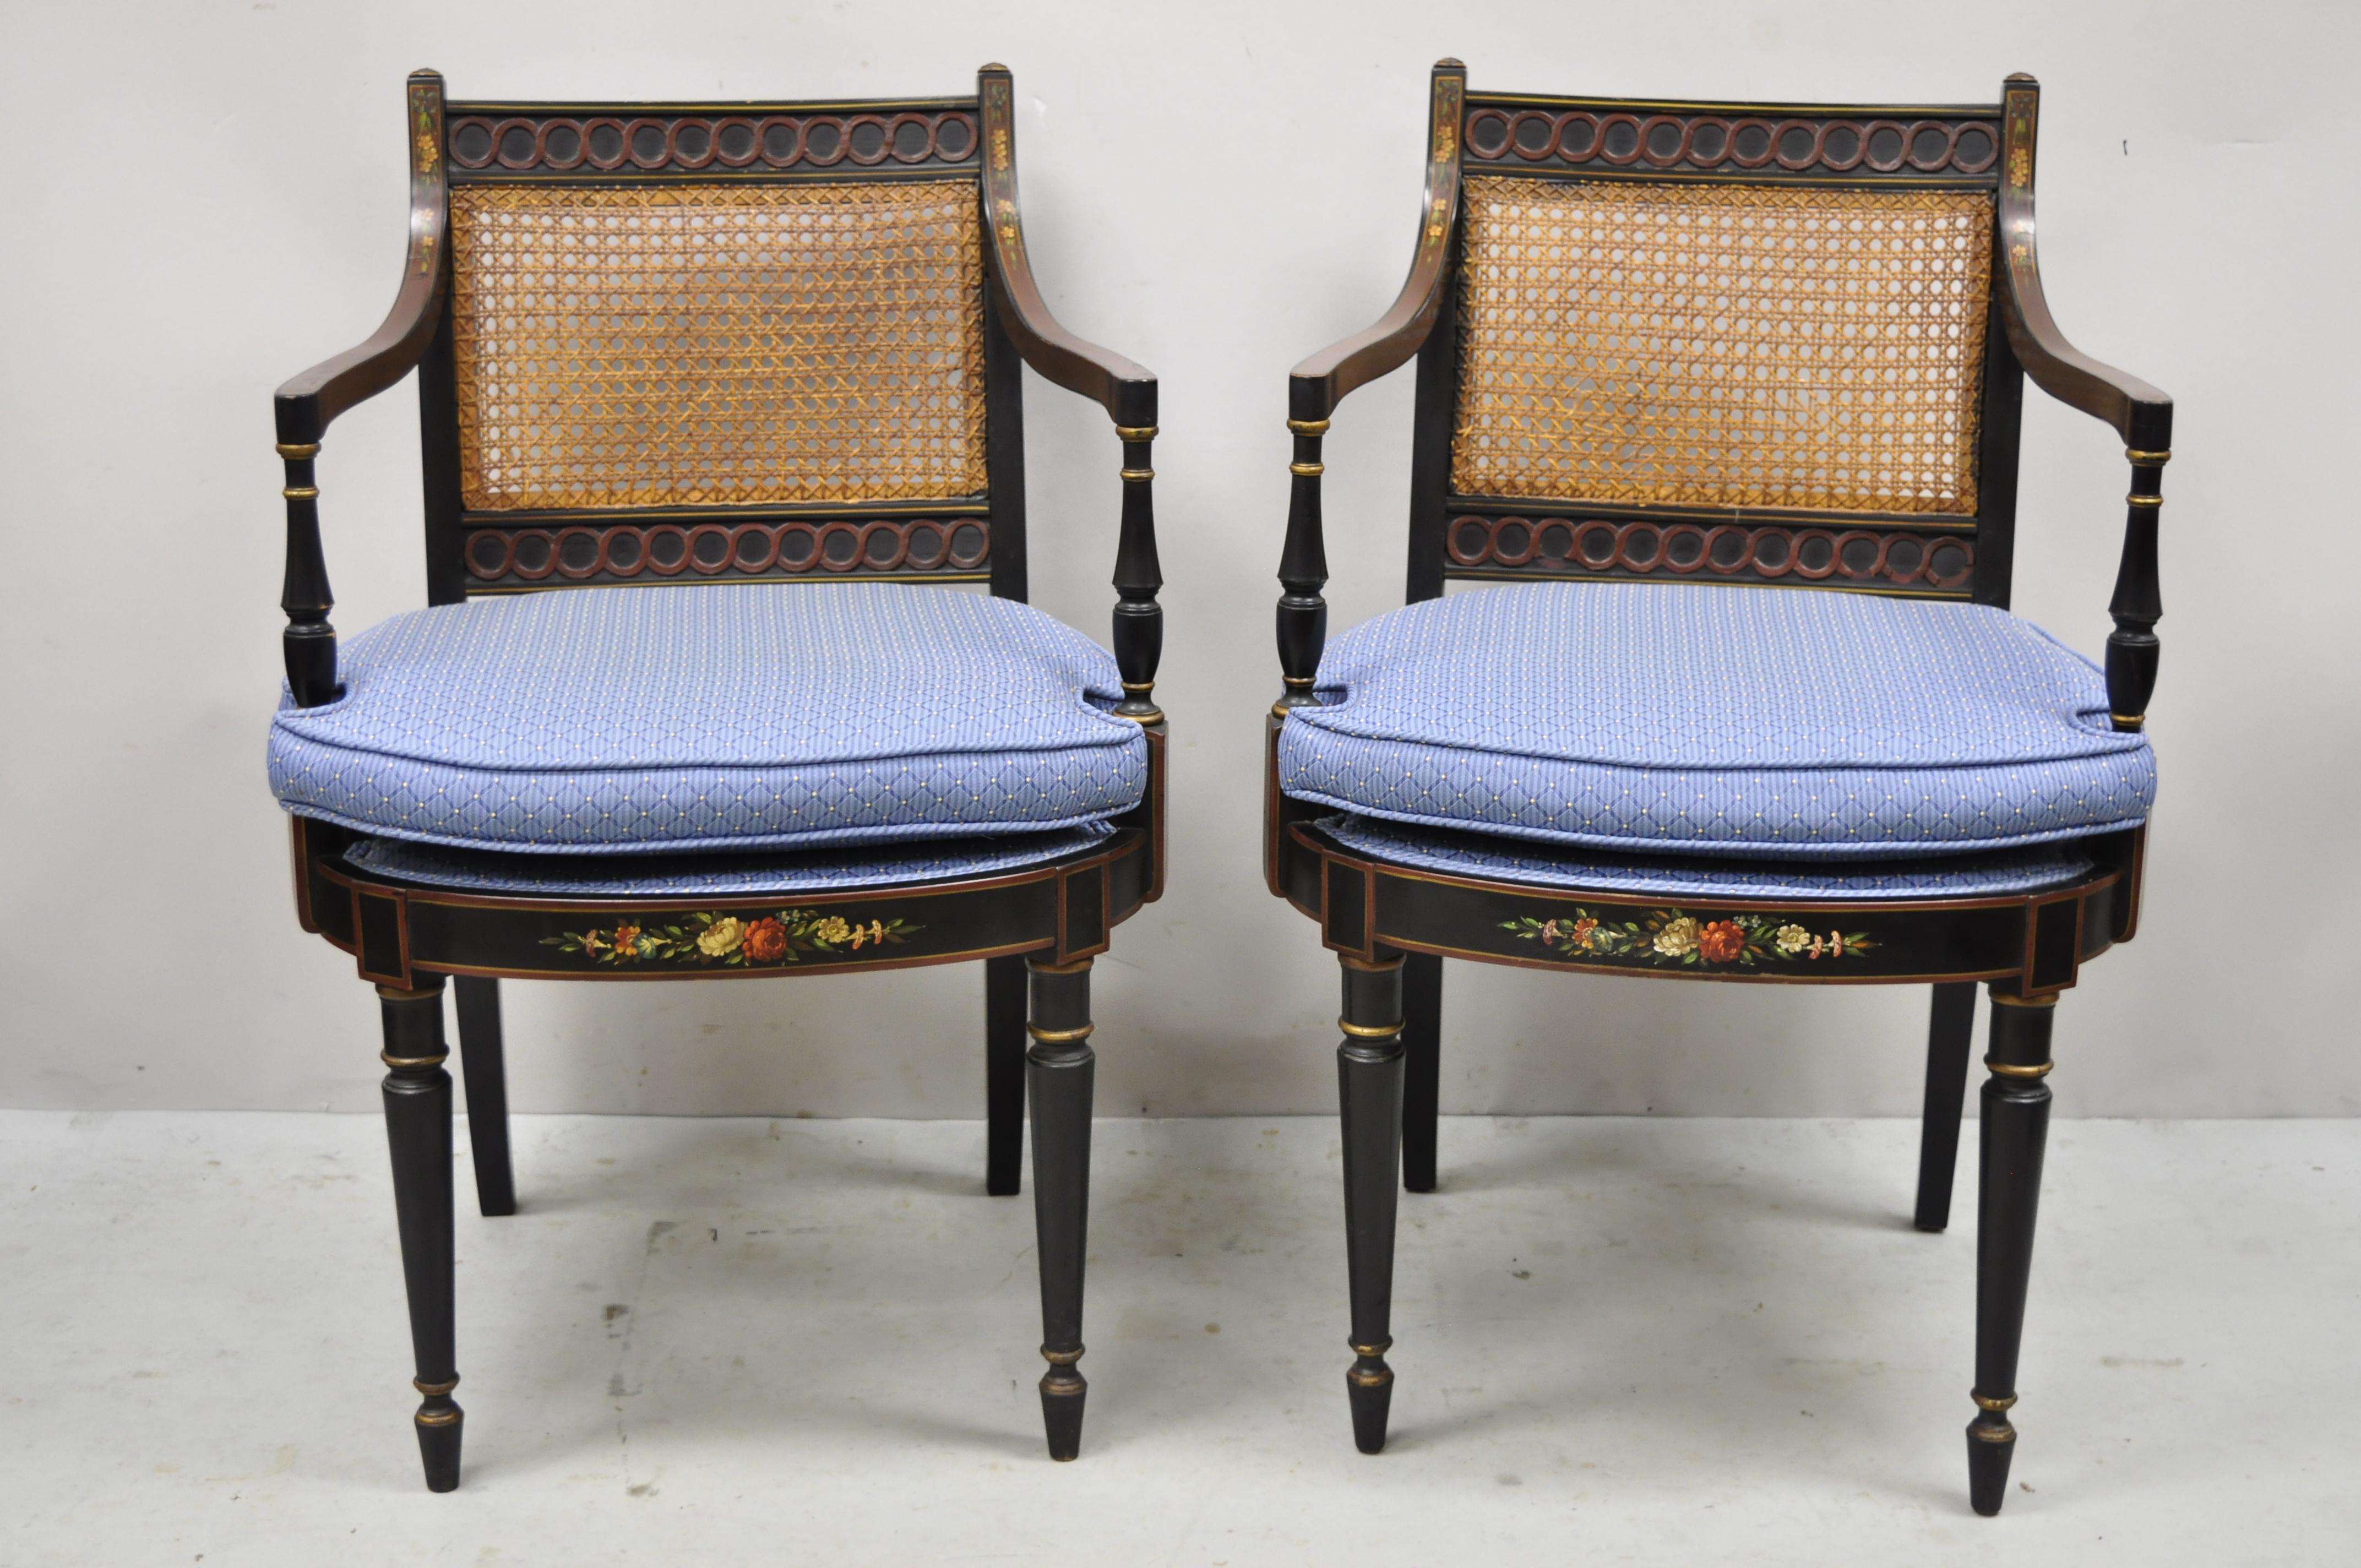 Antique English Regency Ebonized black cane back hand painted arm chairs - a Pair. Item features hand painted floral details, ebonized black finish, cane back, solid wood frames, tapered legs, very nice antique pair, quality craftsmanship, great